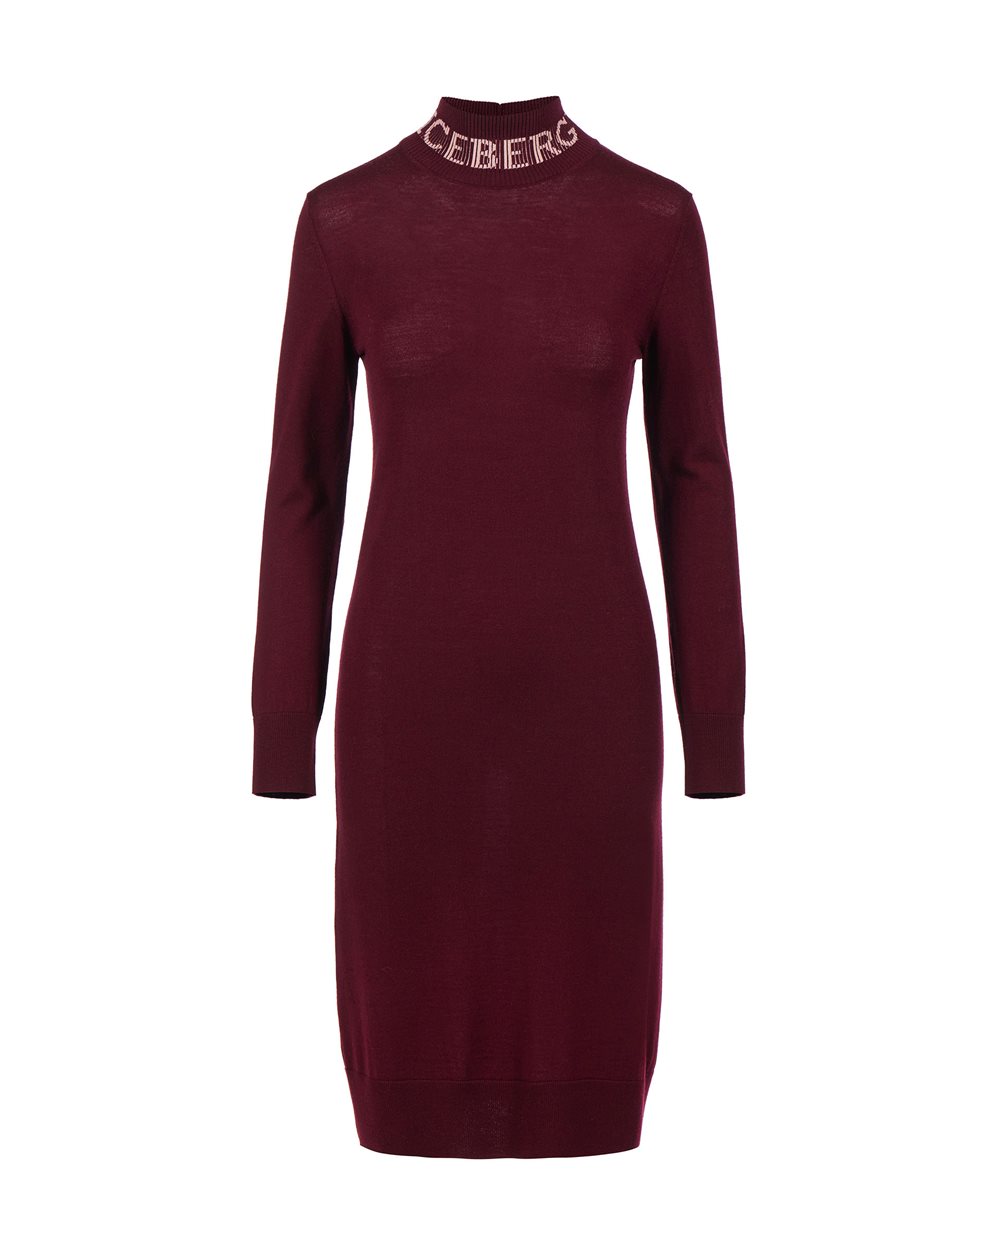 Knit dress with logo - Shop by mood | Iceberg - Official Website